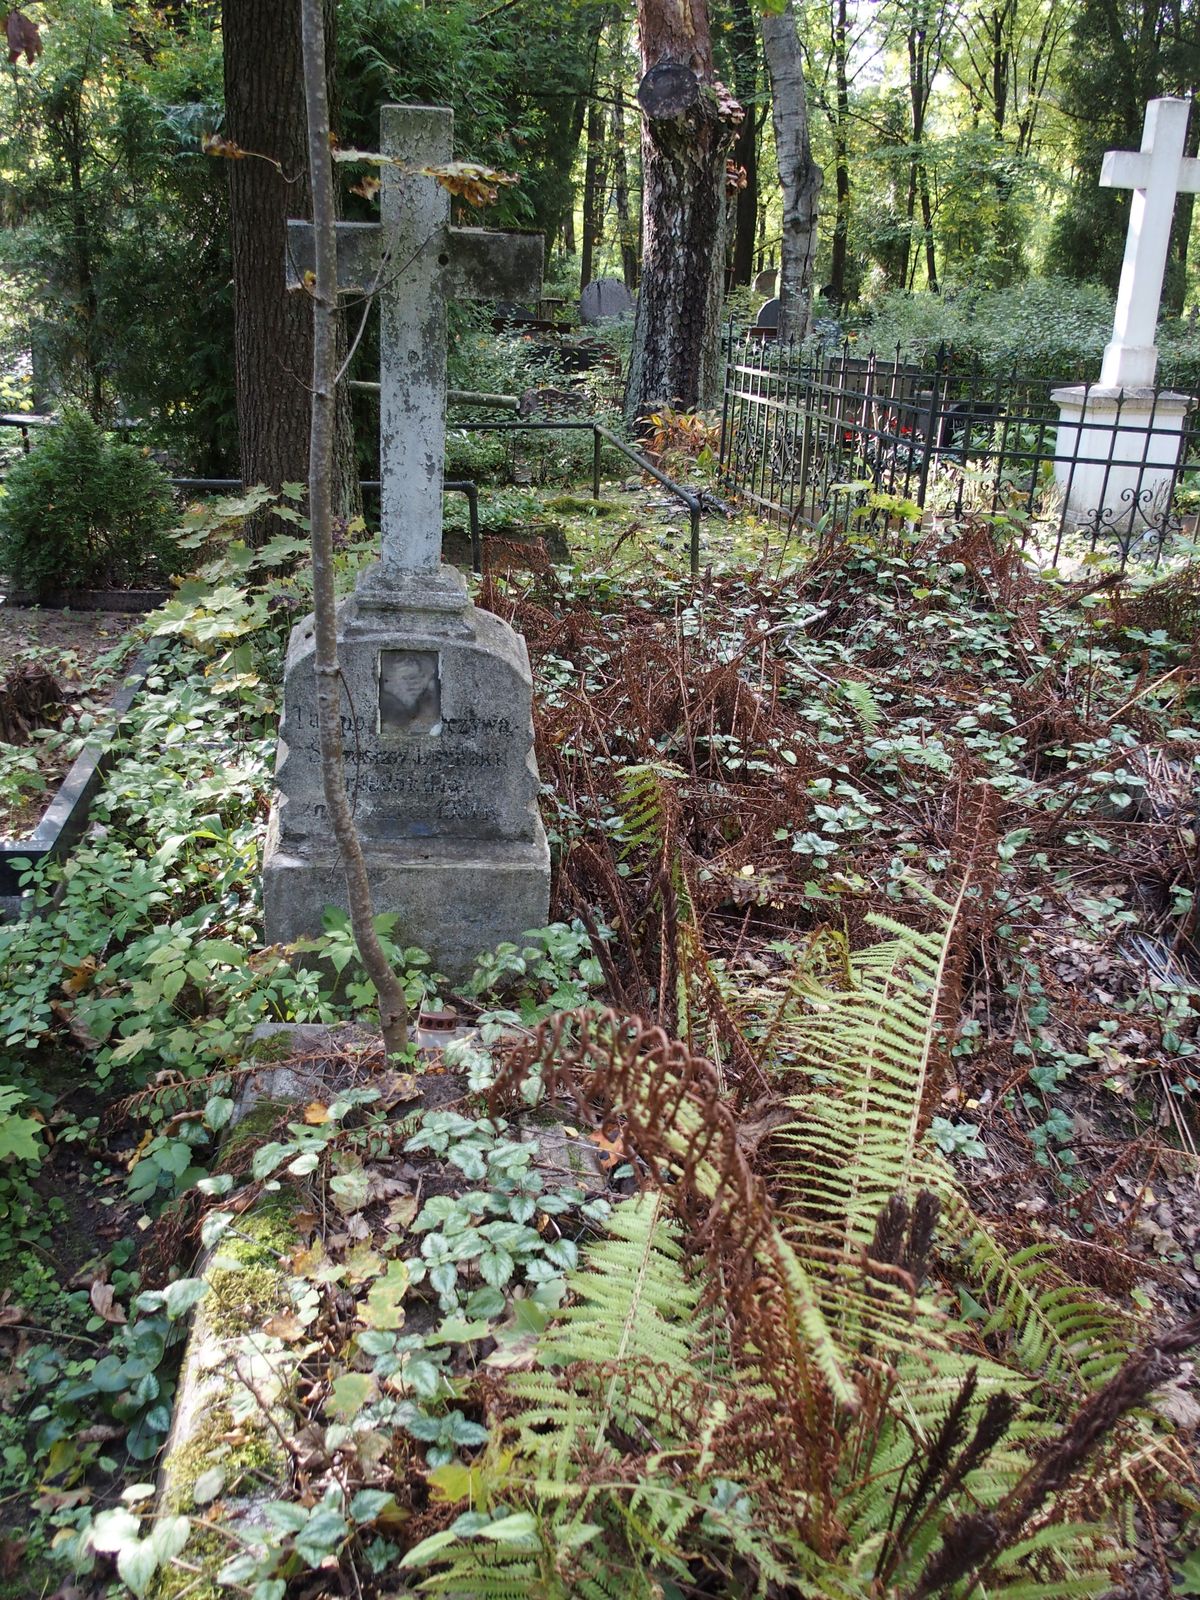 Tombstone of Stanislaw Lipinski, St Michael's cemetery in Riga, as of 2021.